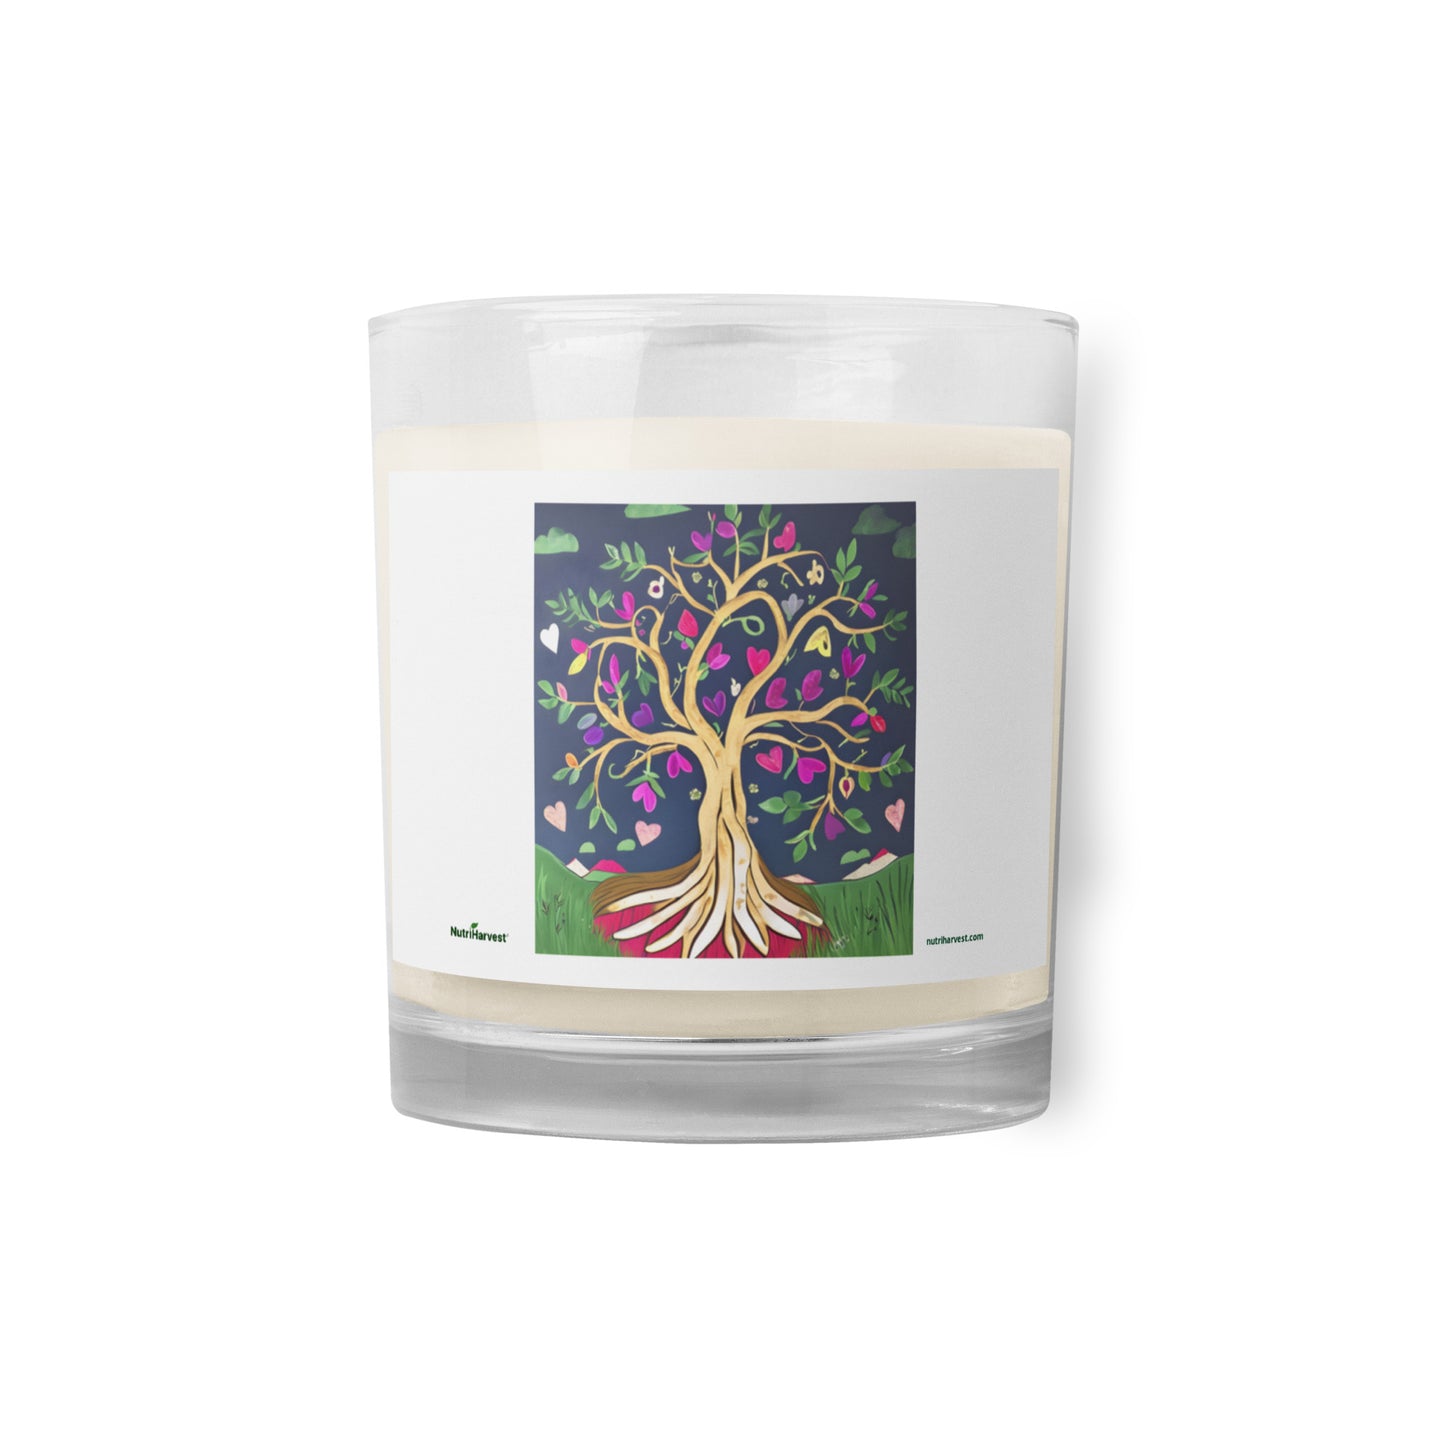 Beautiful Glass Jar Soy Wax Candle with Tree Art